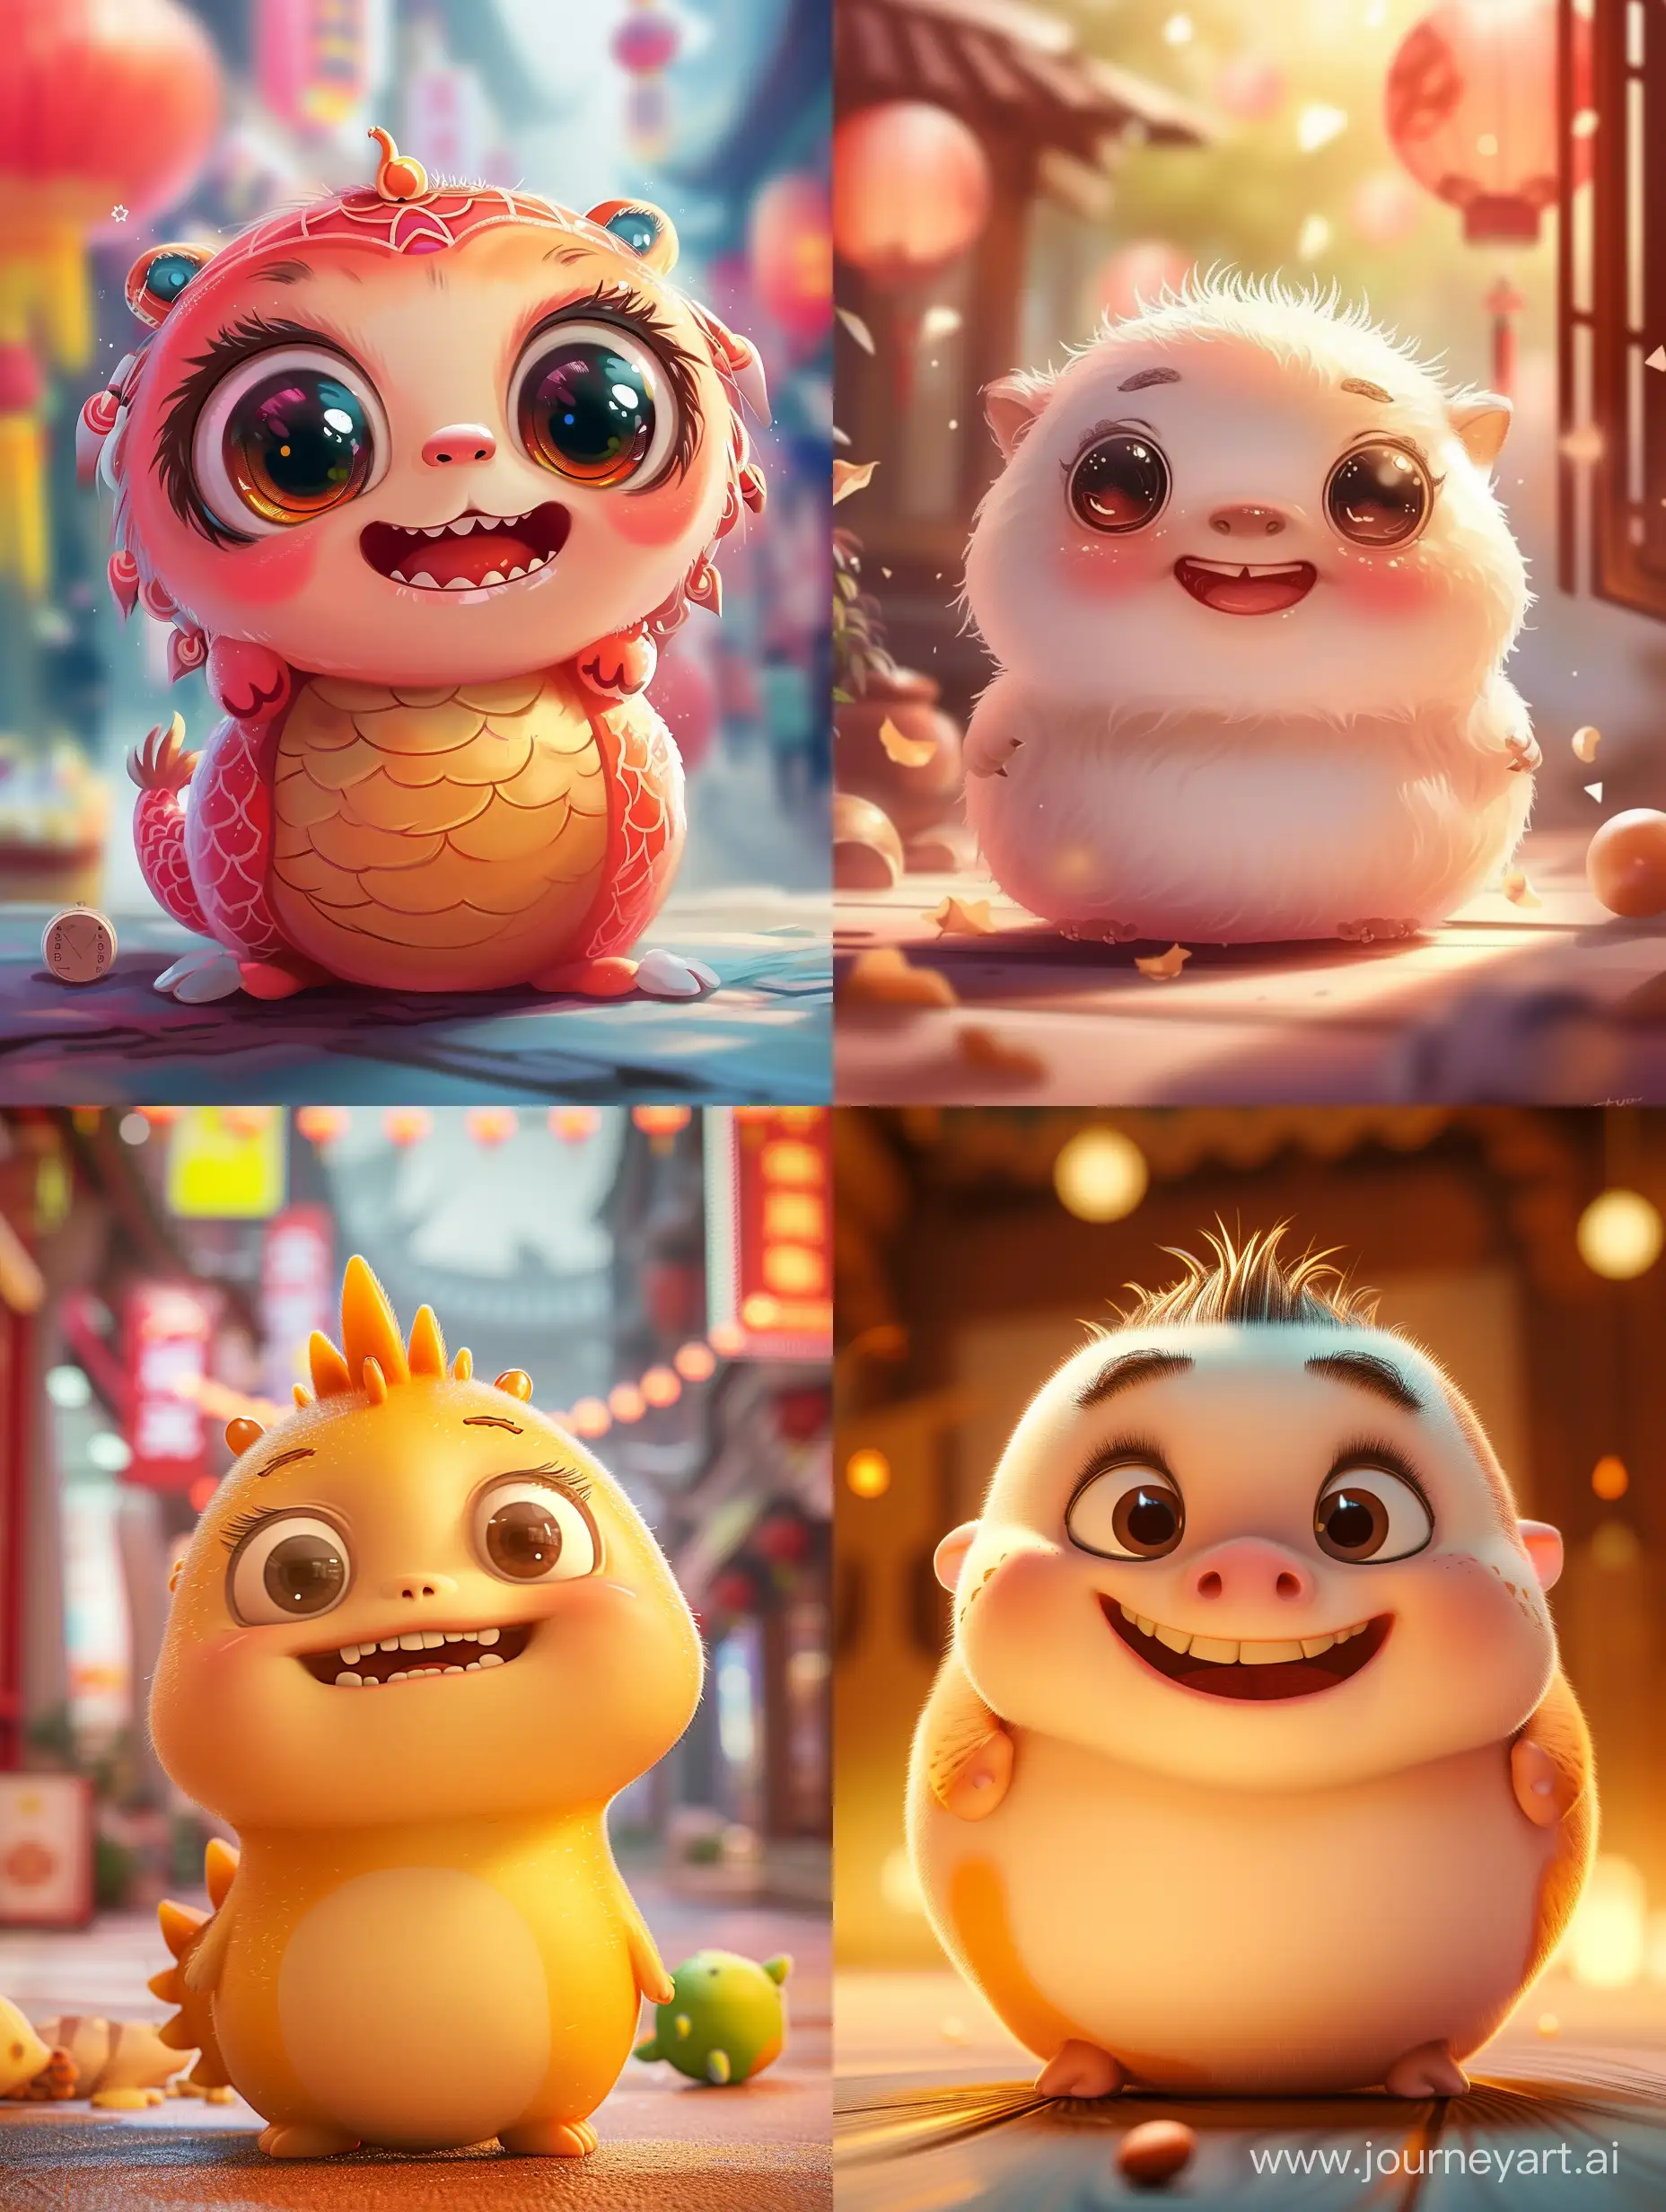 A cute cartoon character with a chubby face, big eyes, and a big smile representing the Chinese zodiac year of the Dragon. This adorable image is designed as a mobile wallpaper in a vibrant and lively anime style. The 8K HDR best quality ensures that every intricate detail is vividly displayed, making this artwork even more stunning.

